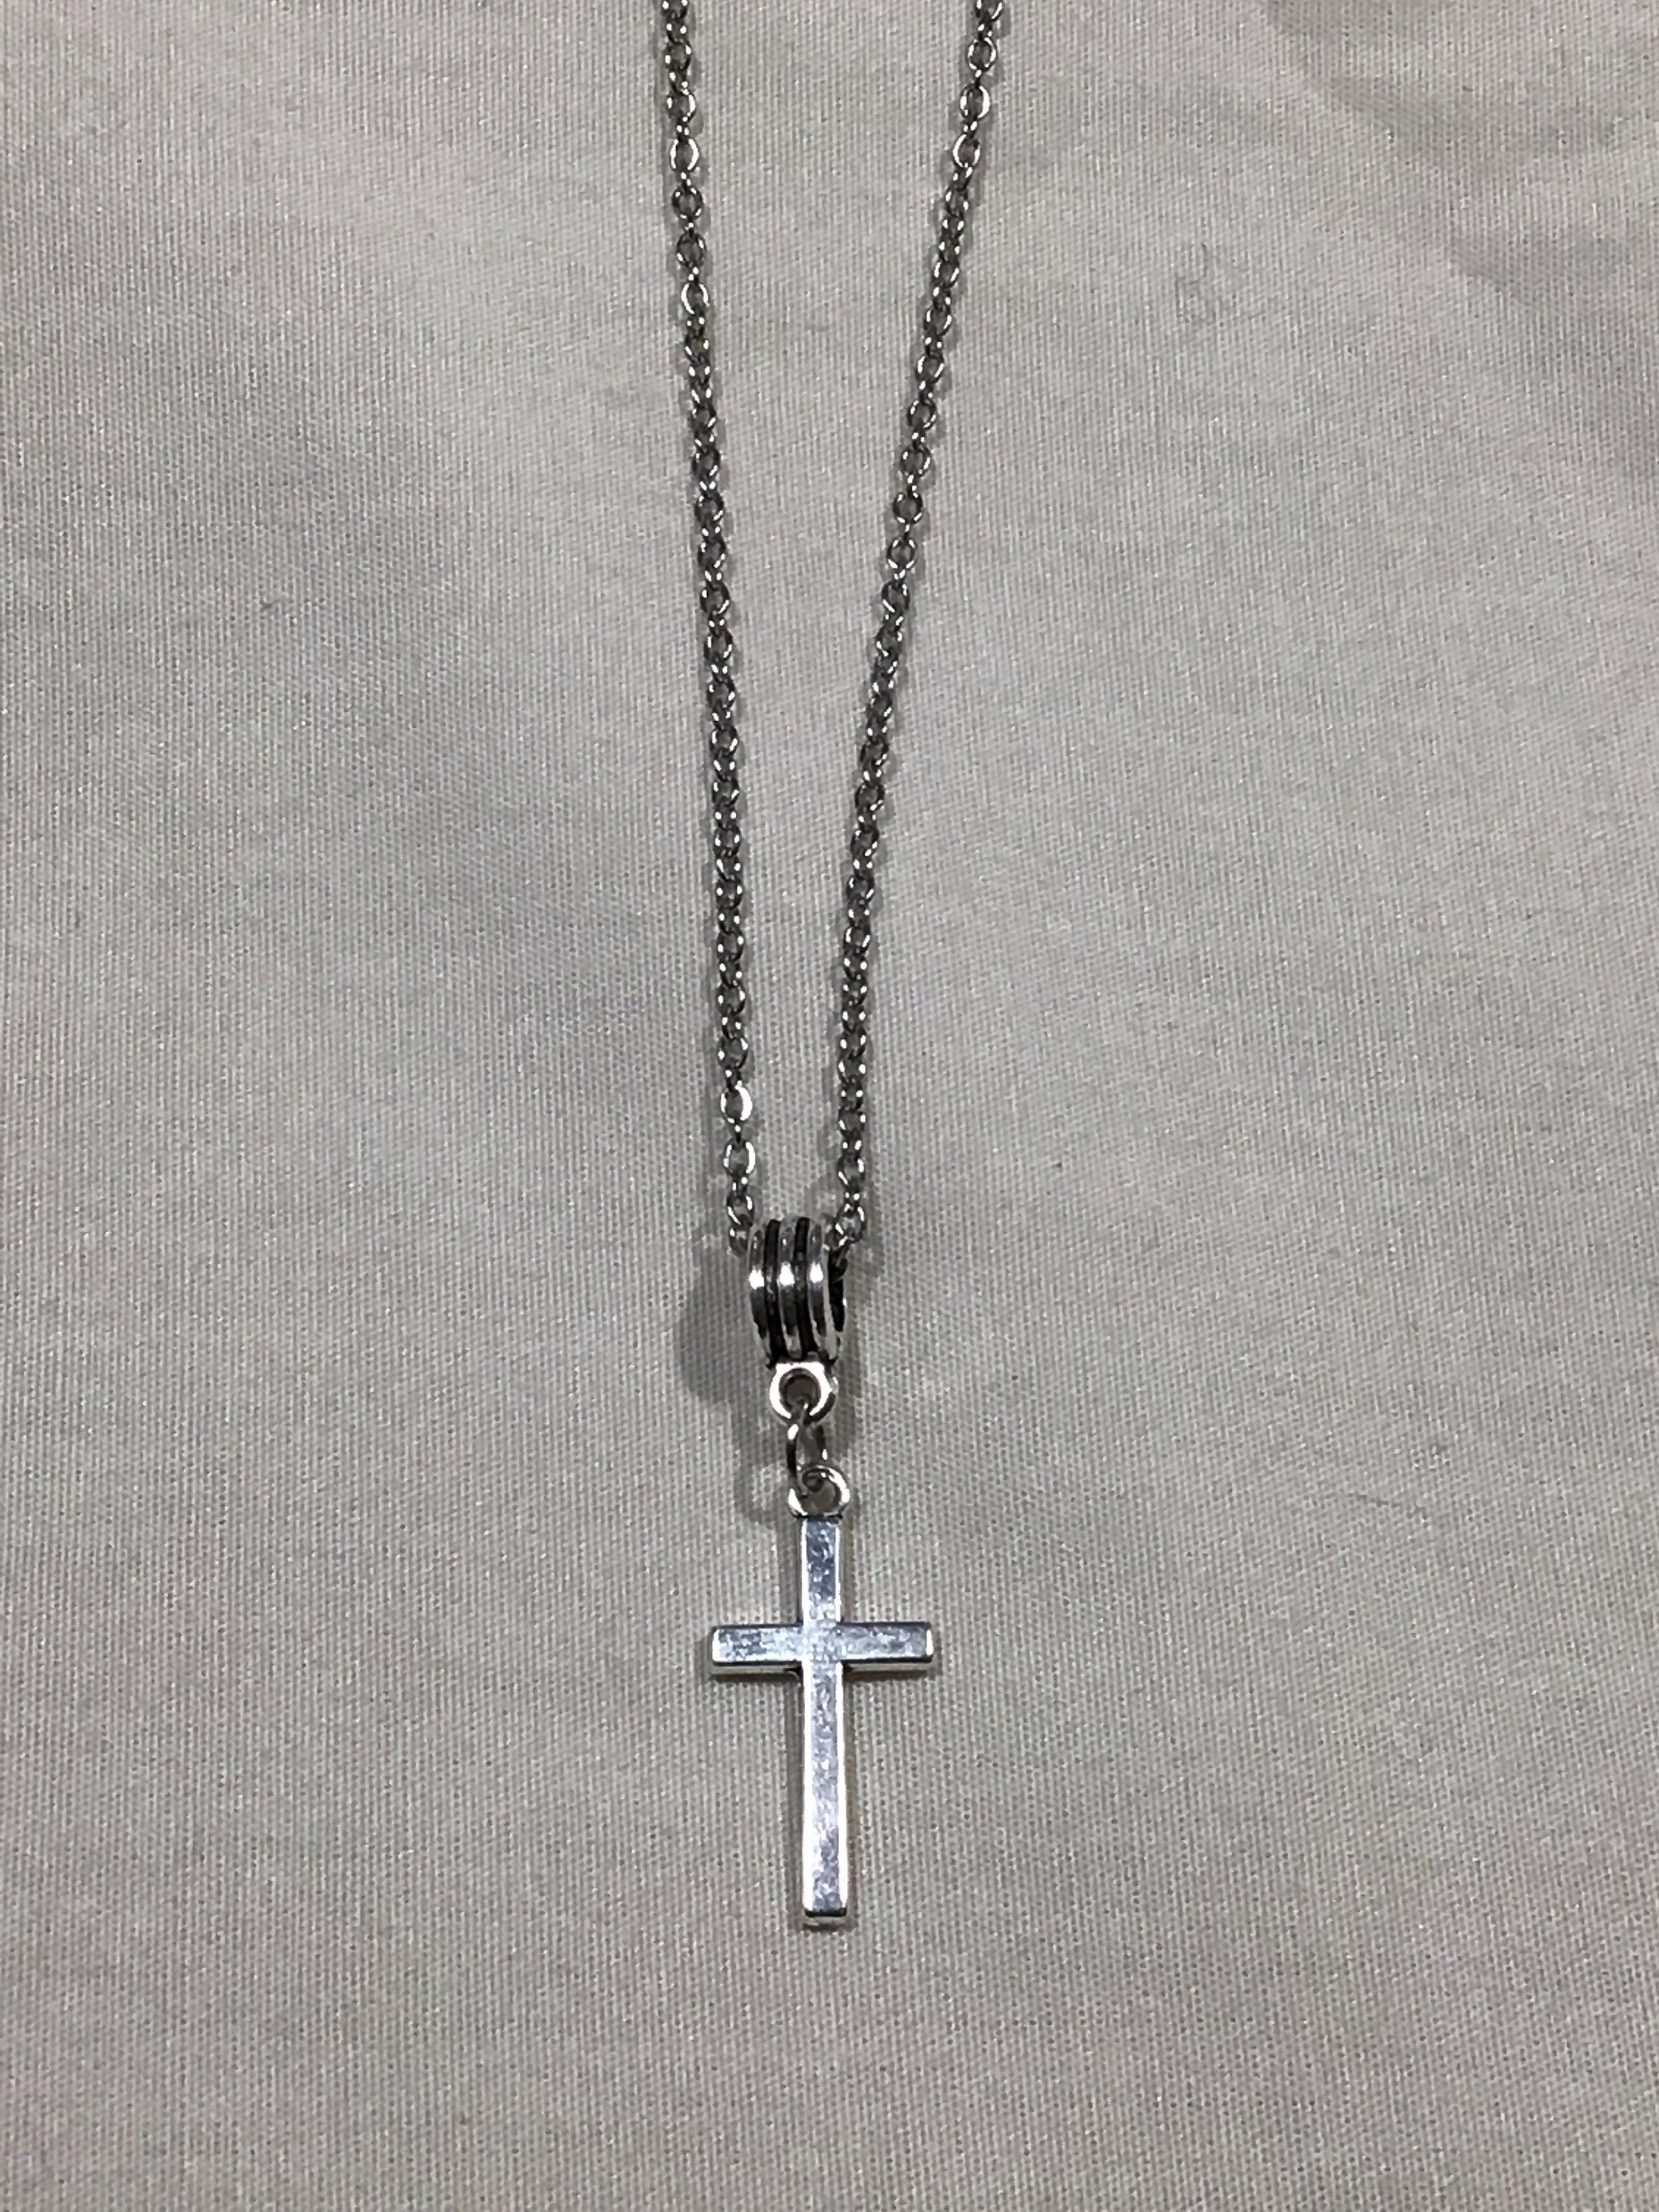 Simplistic Christian cross for anyone wanting show show their | Etsy